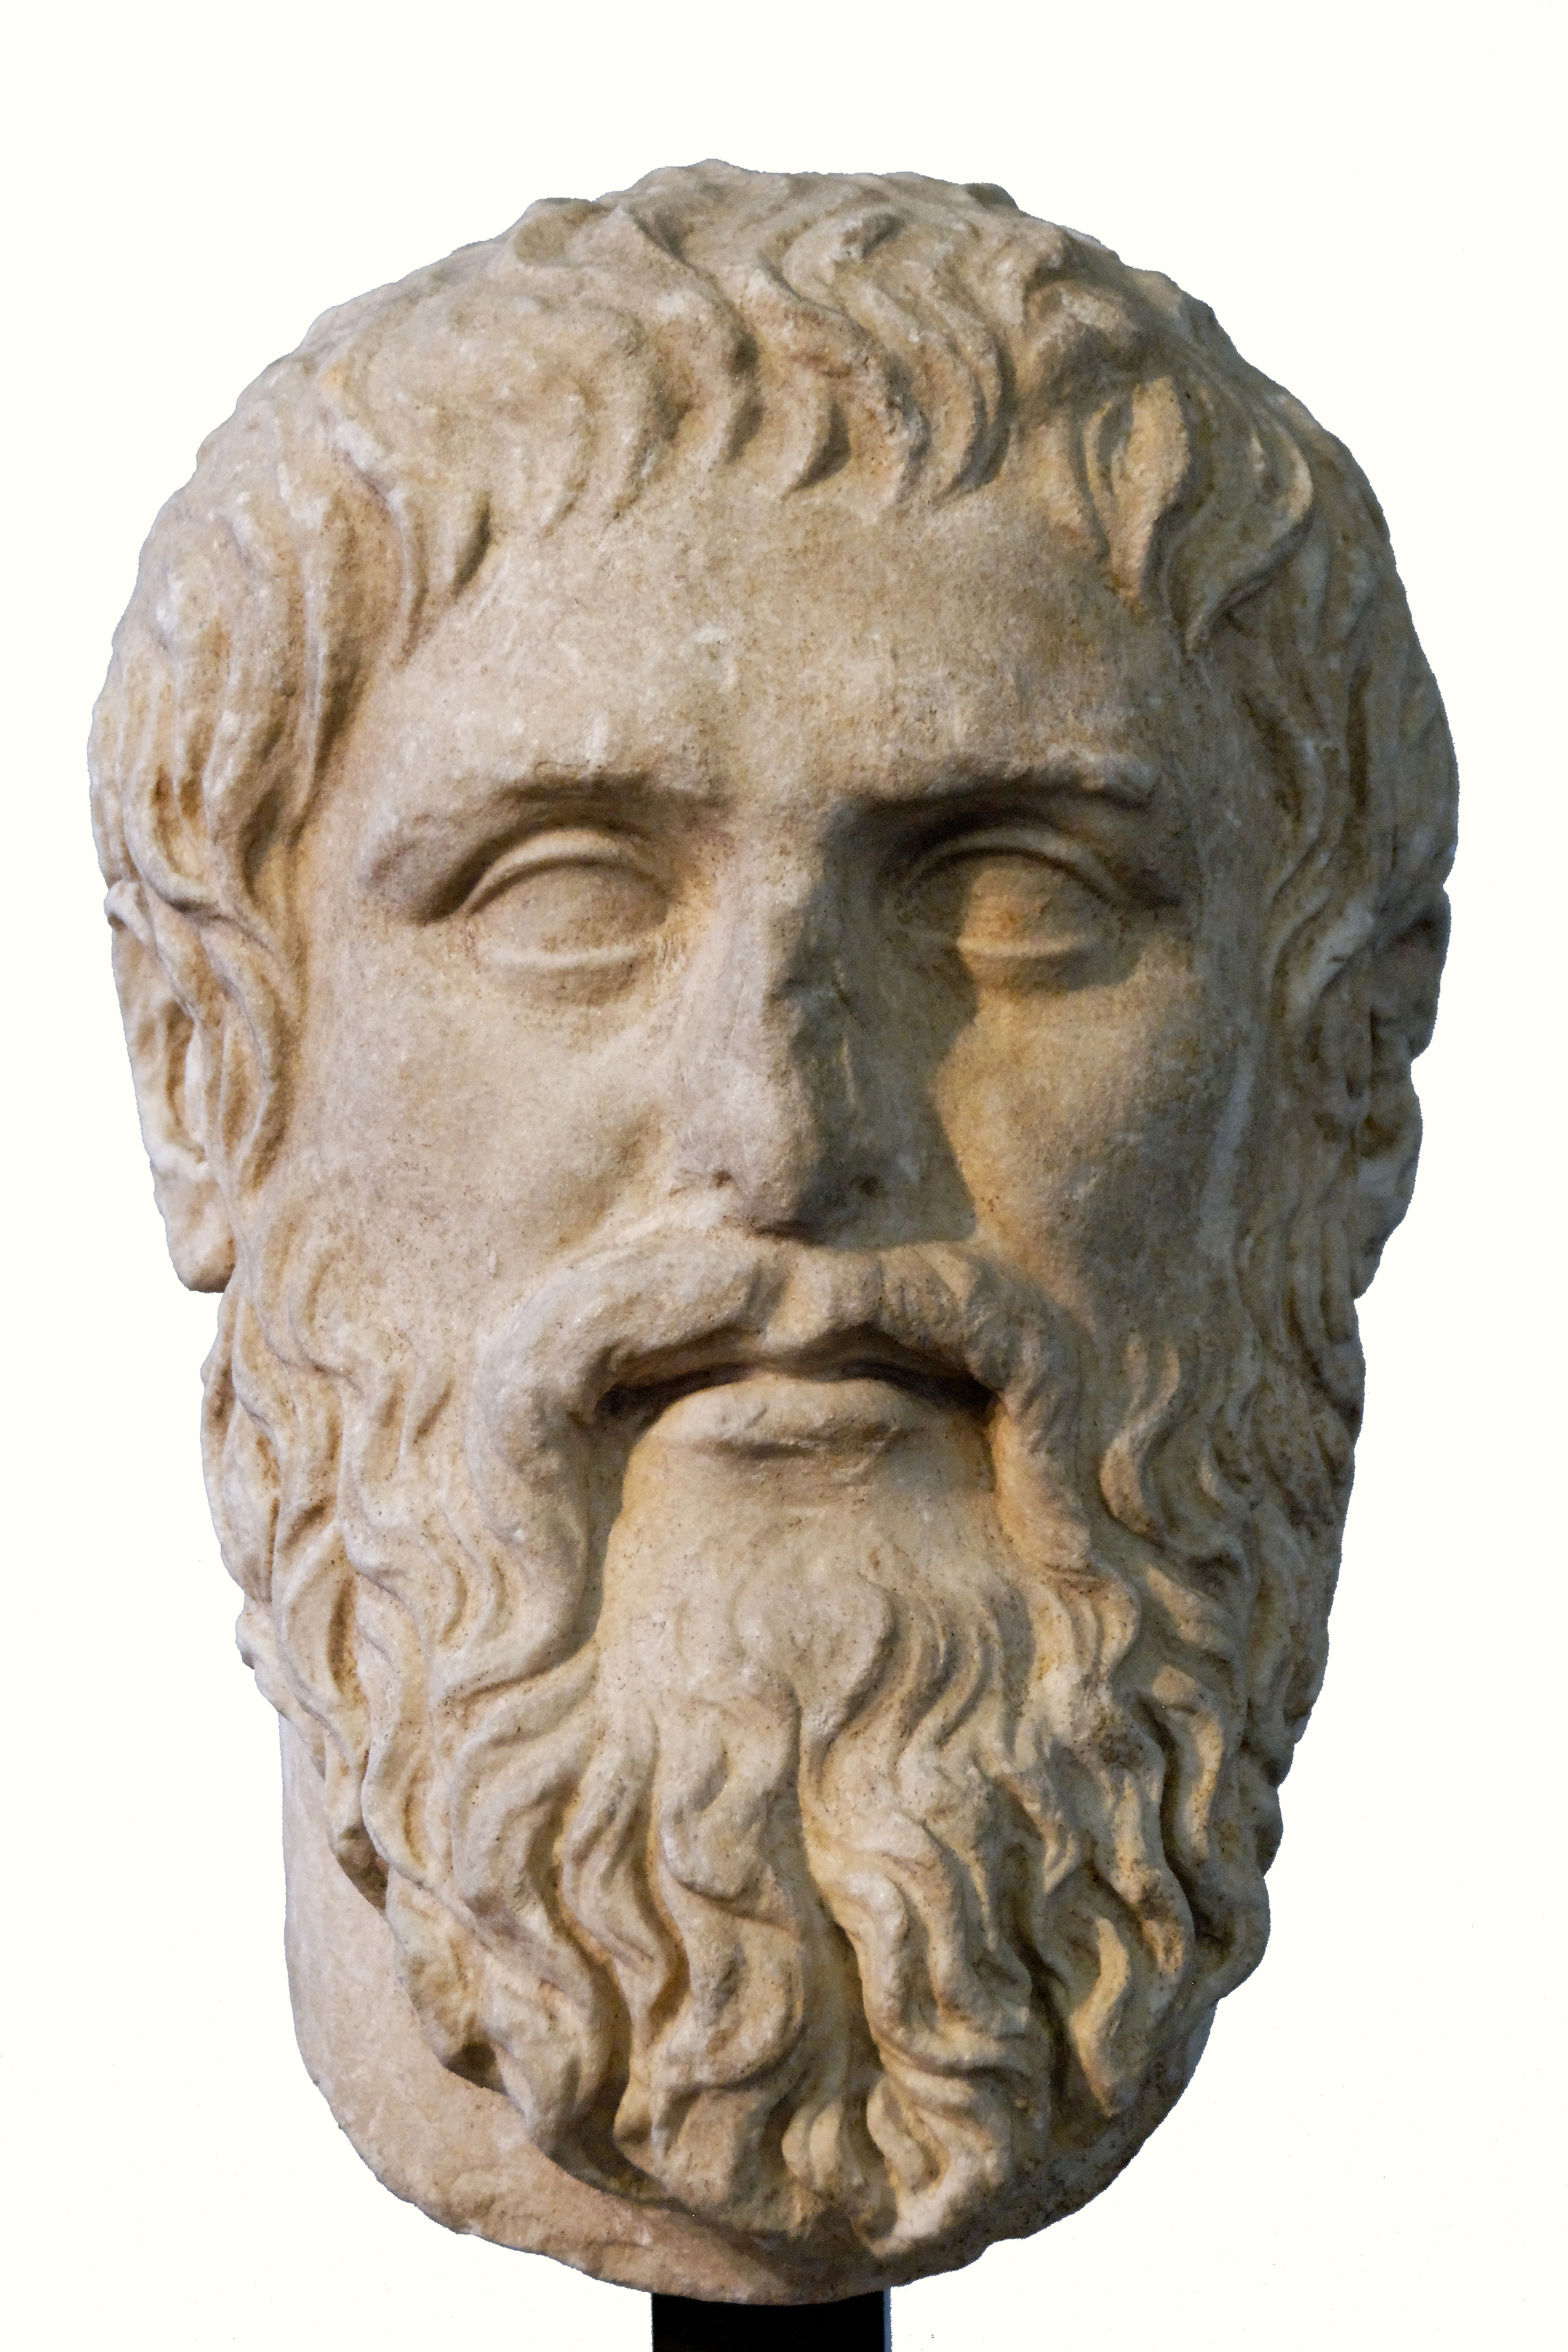 Plato quotes about death, Seattle Funeral